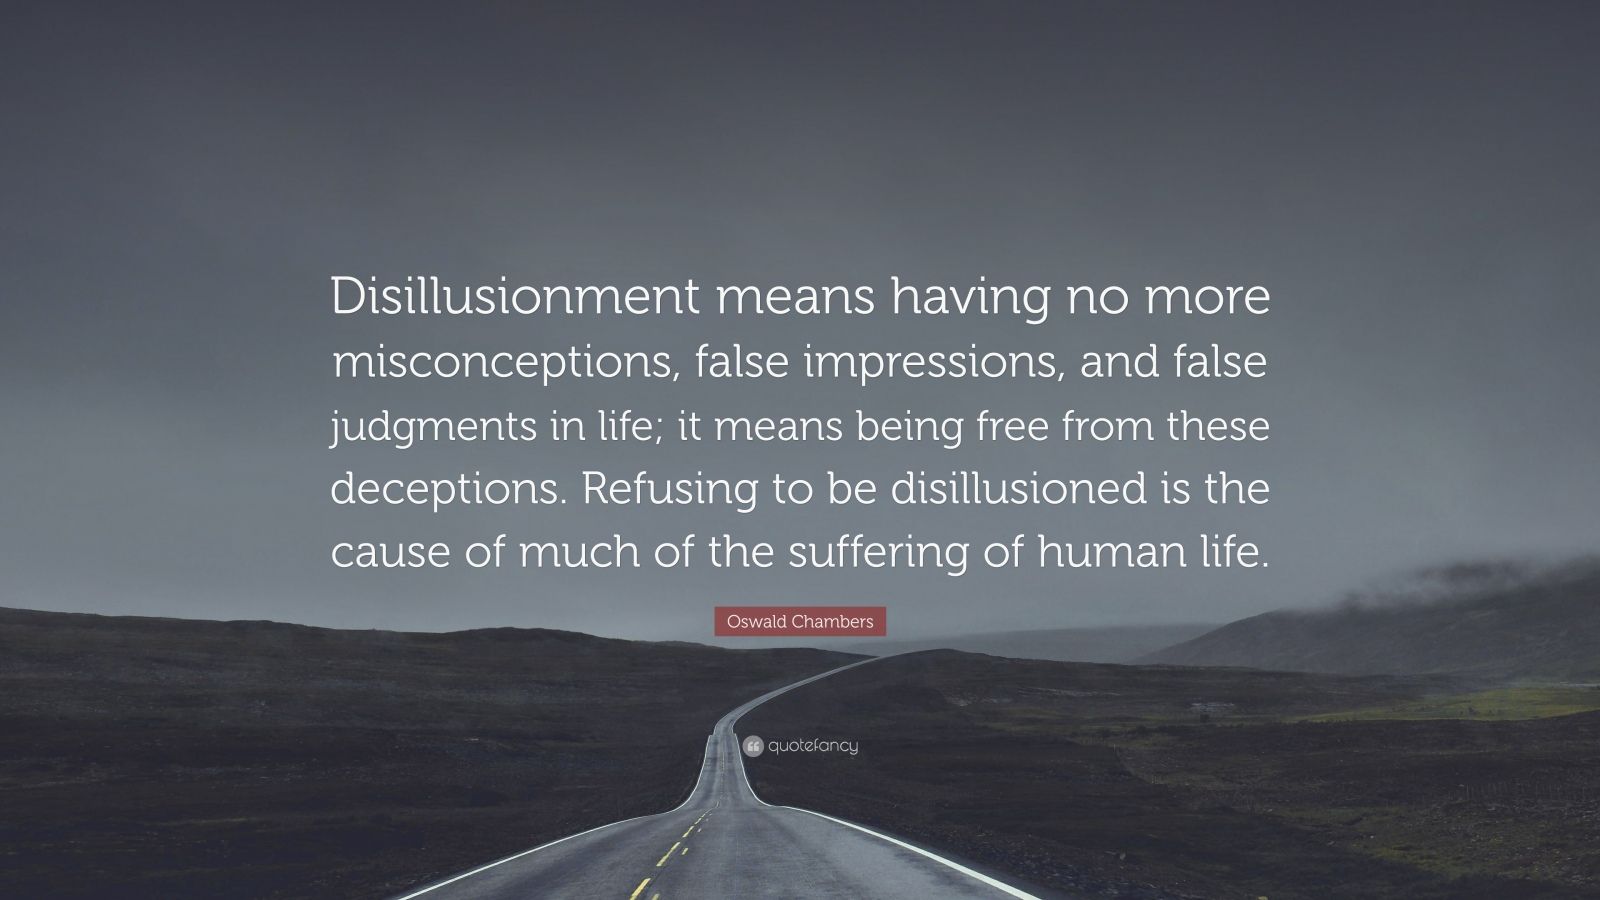 Oswald Chambers Quote: “Disillusionment means having no more